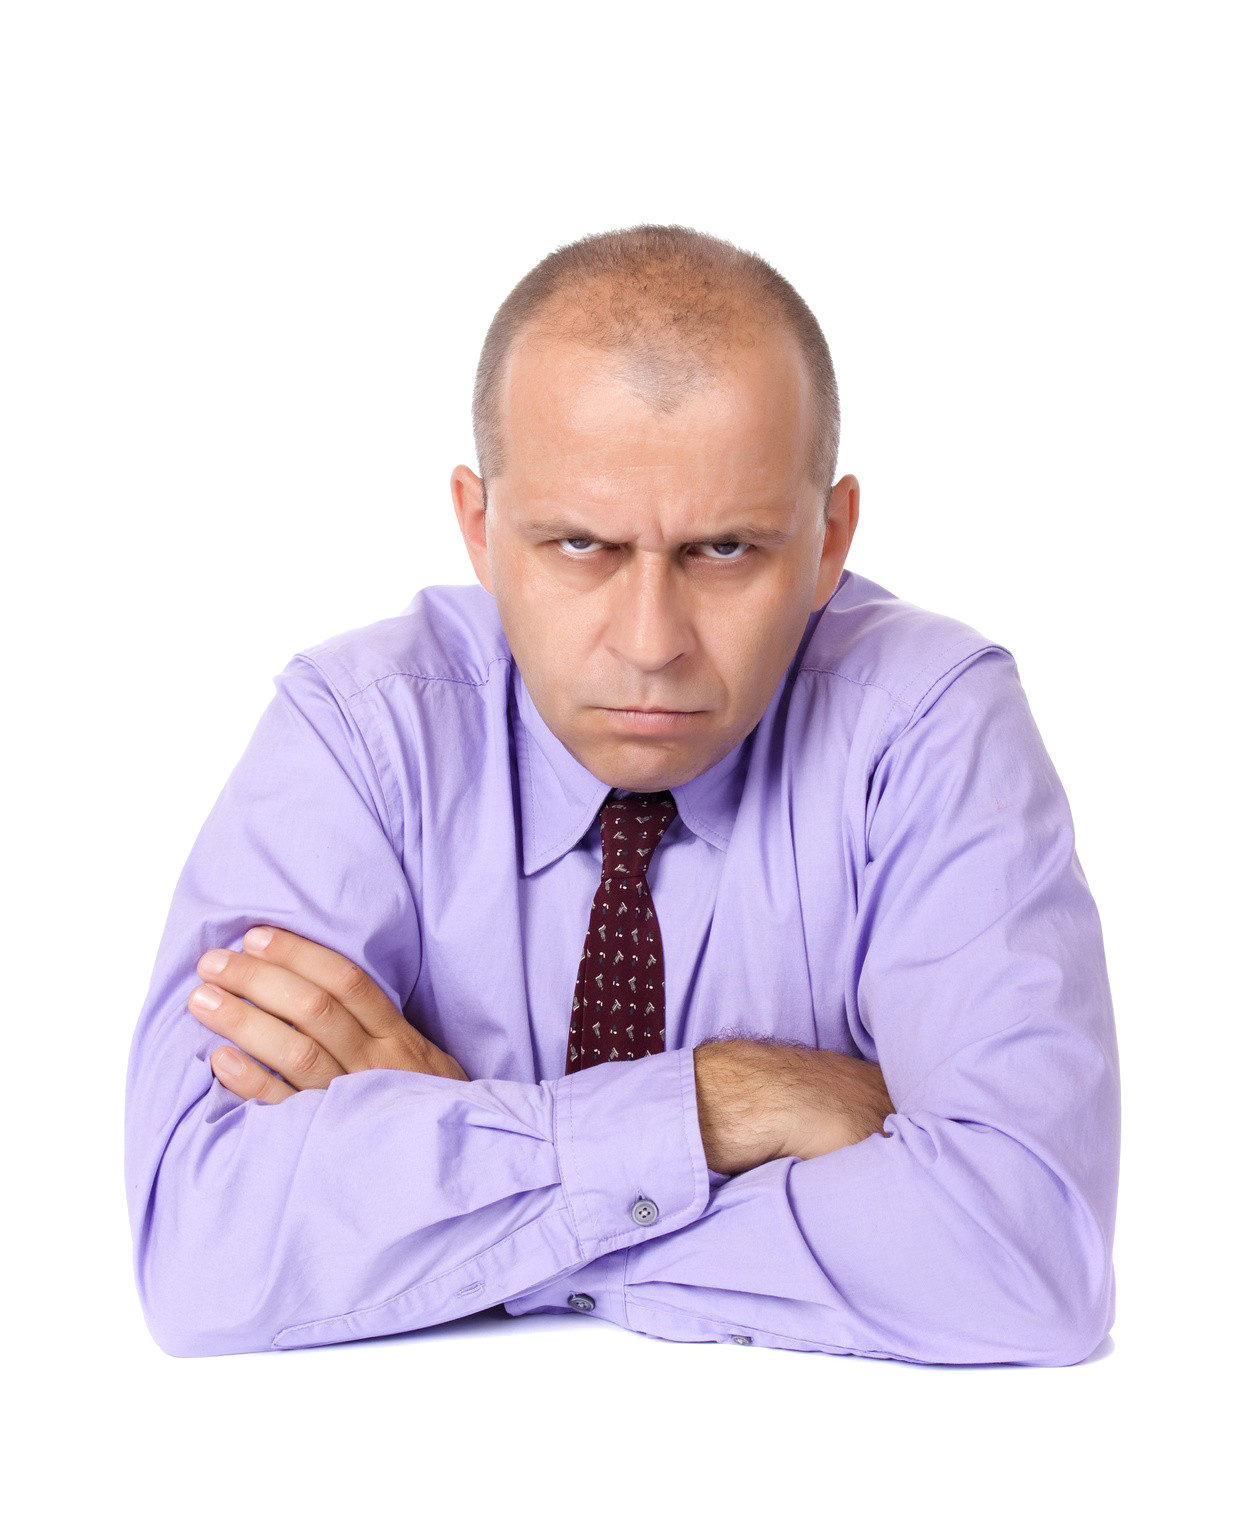 Angry Person PNG Free Download